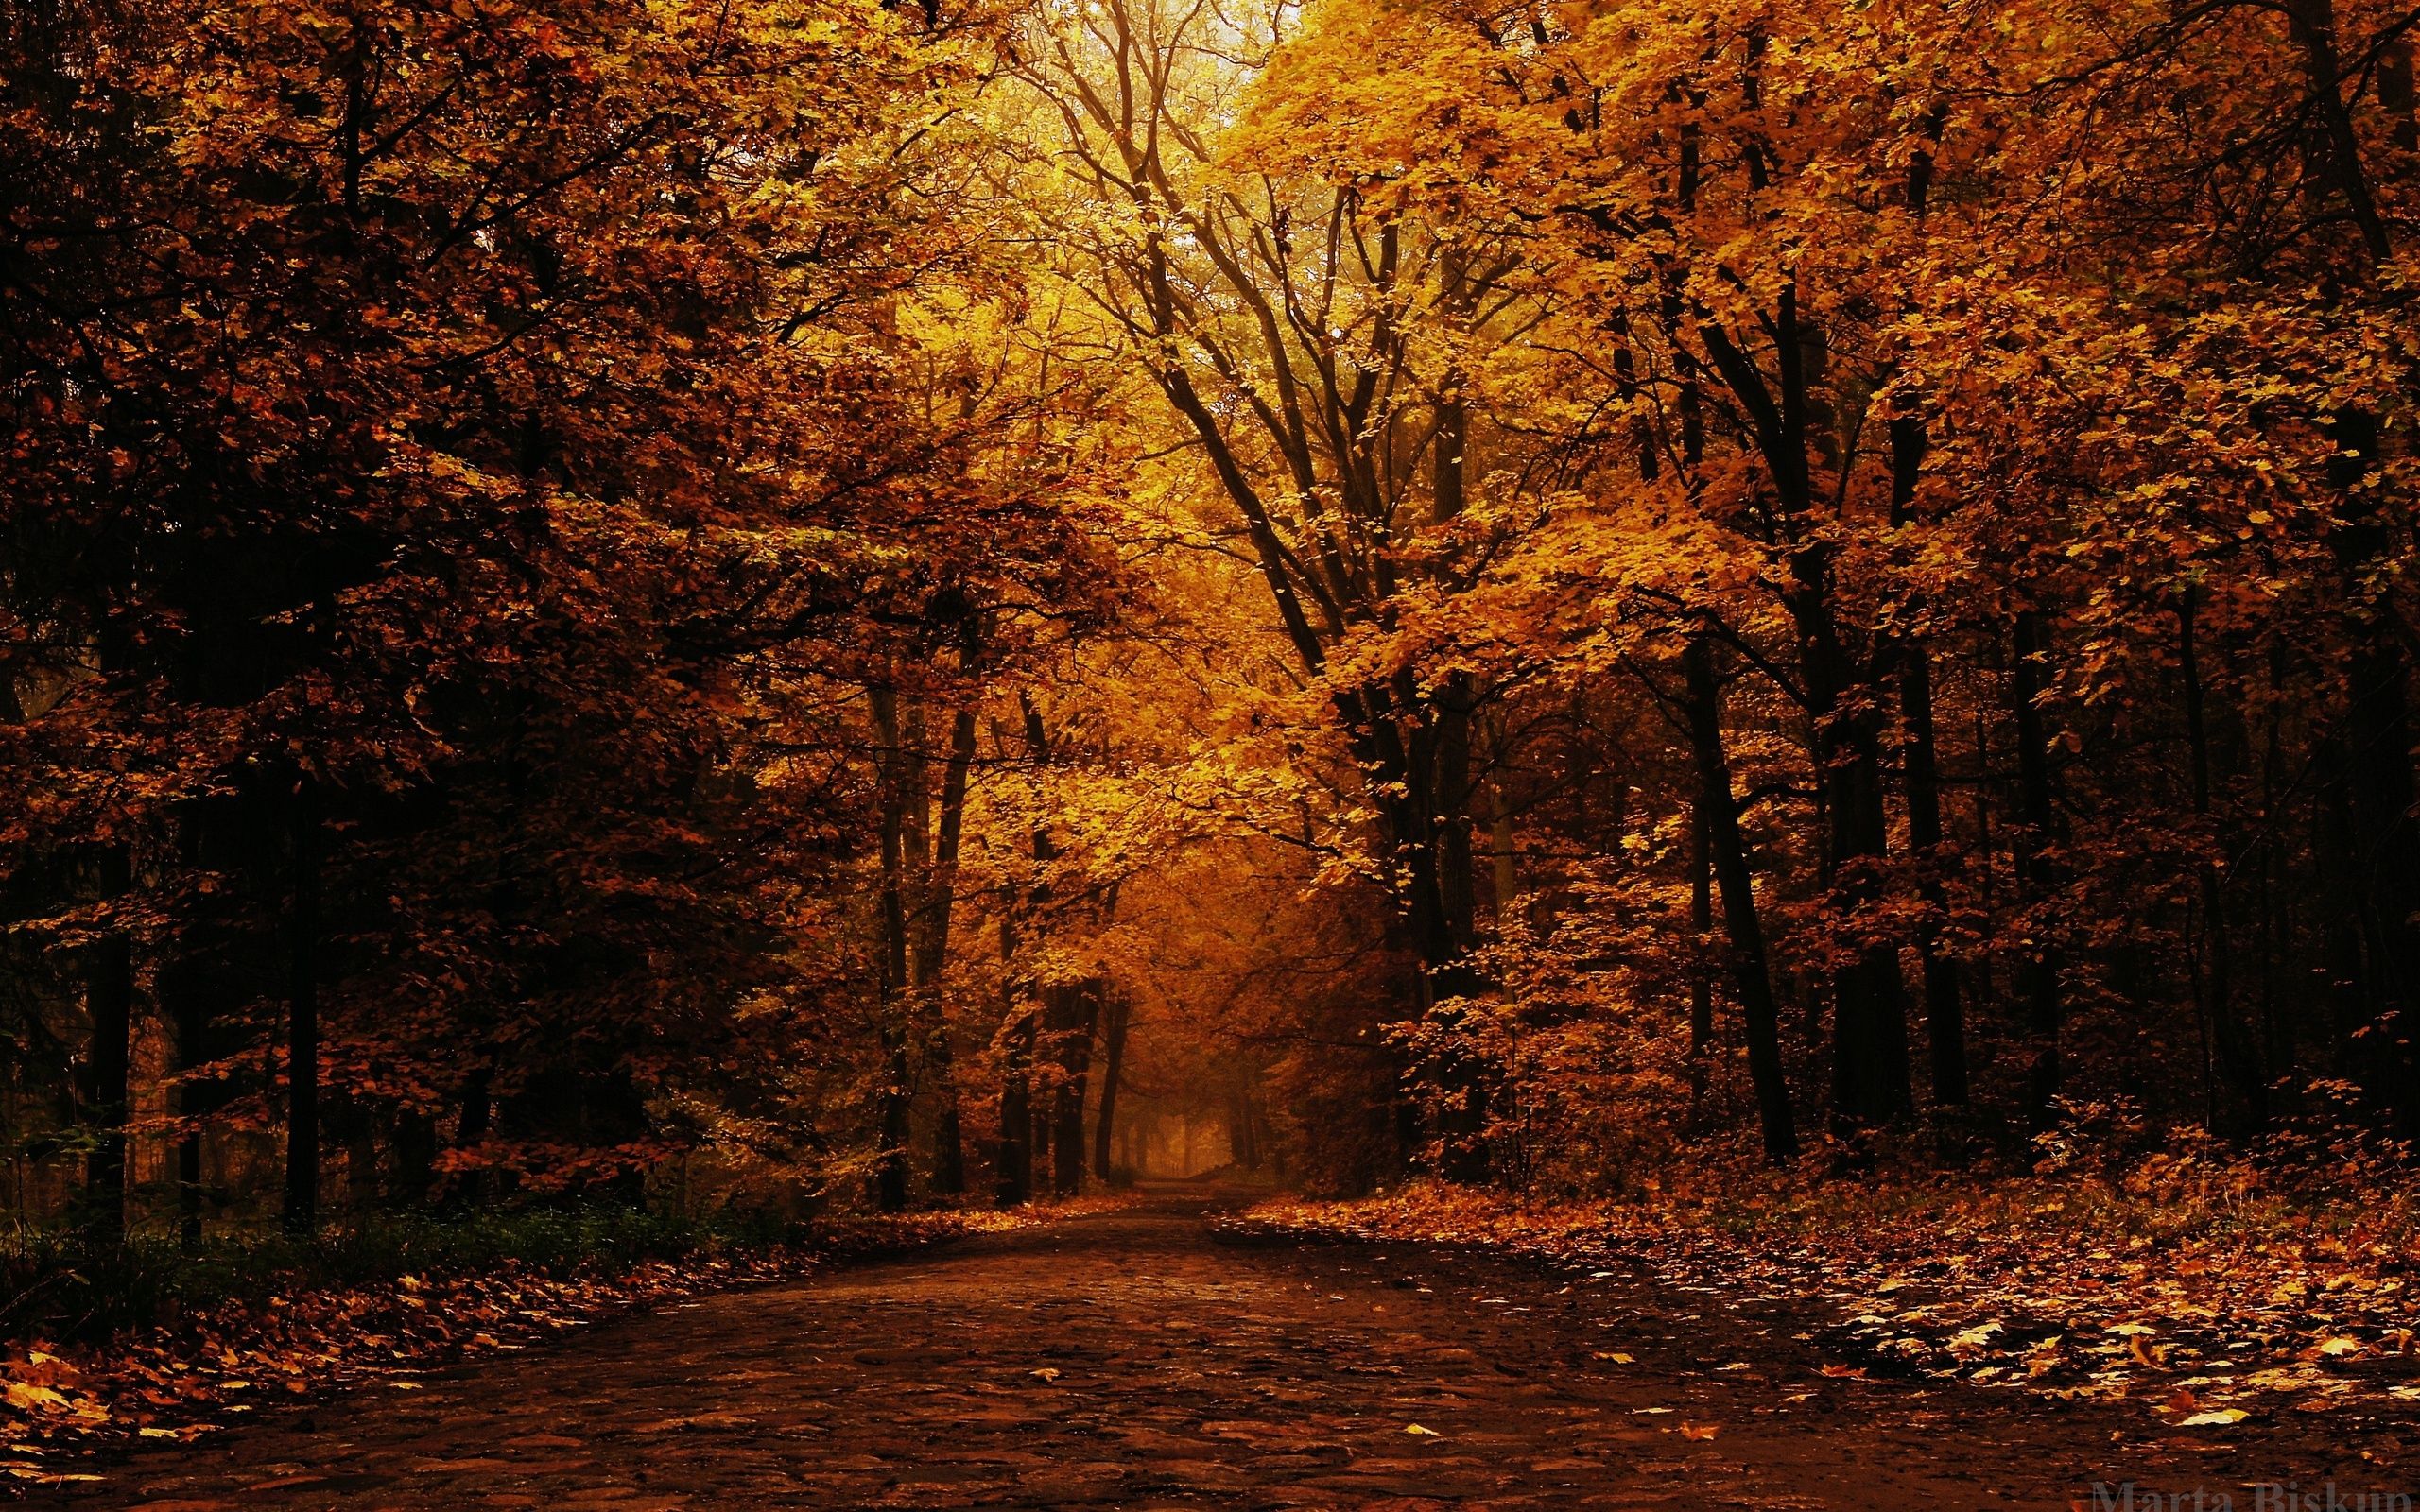 Dense forest in autumn wallpaper and image, picture, photo